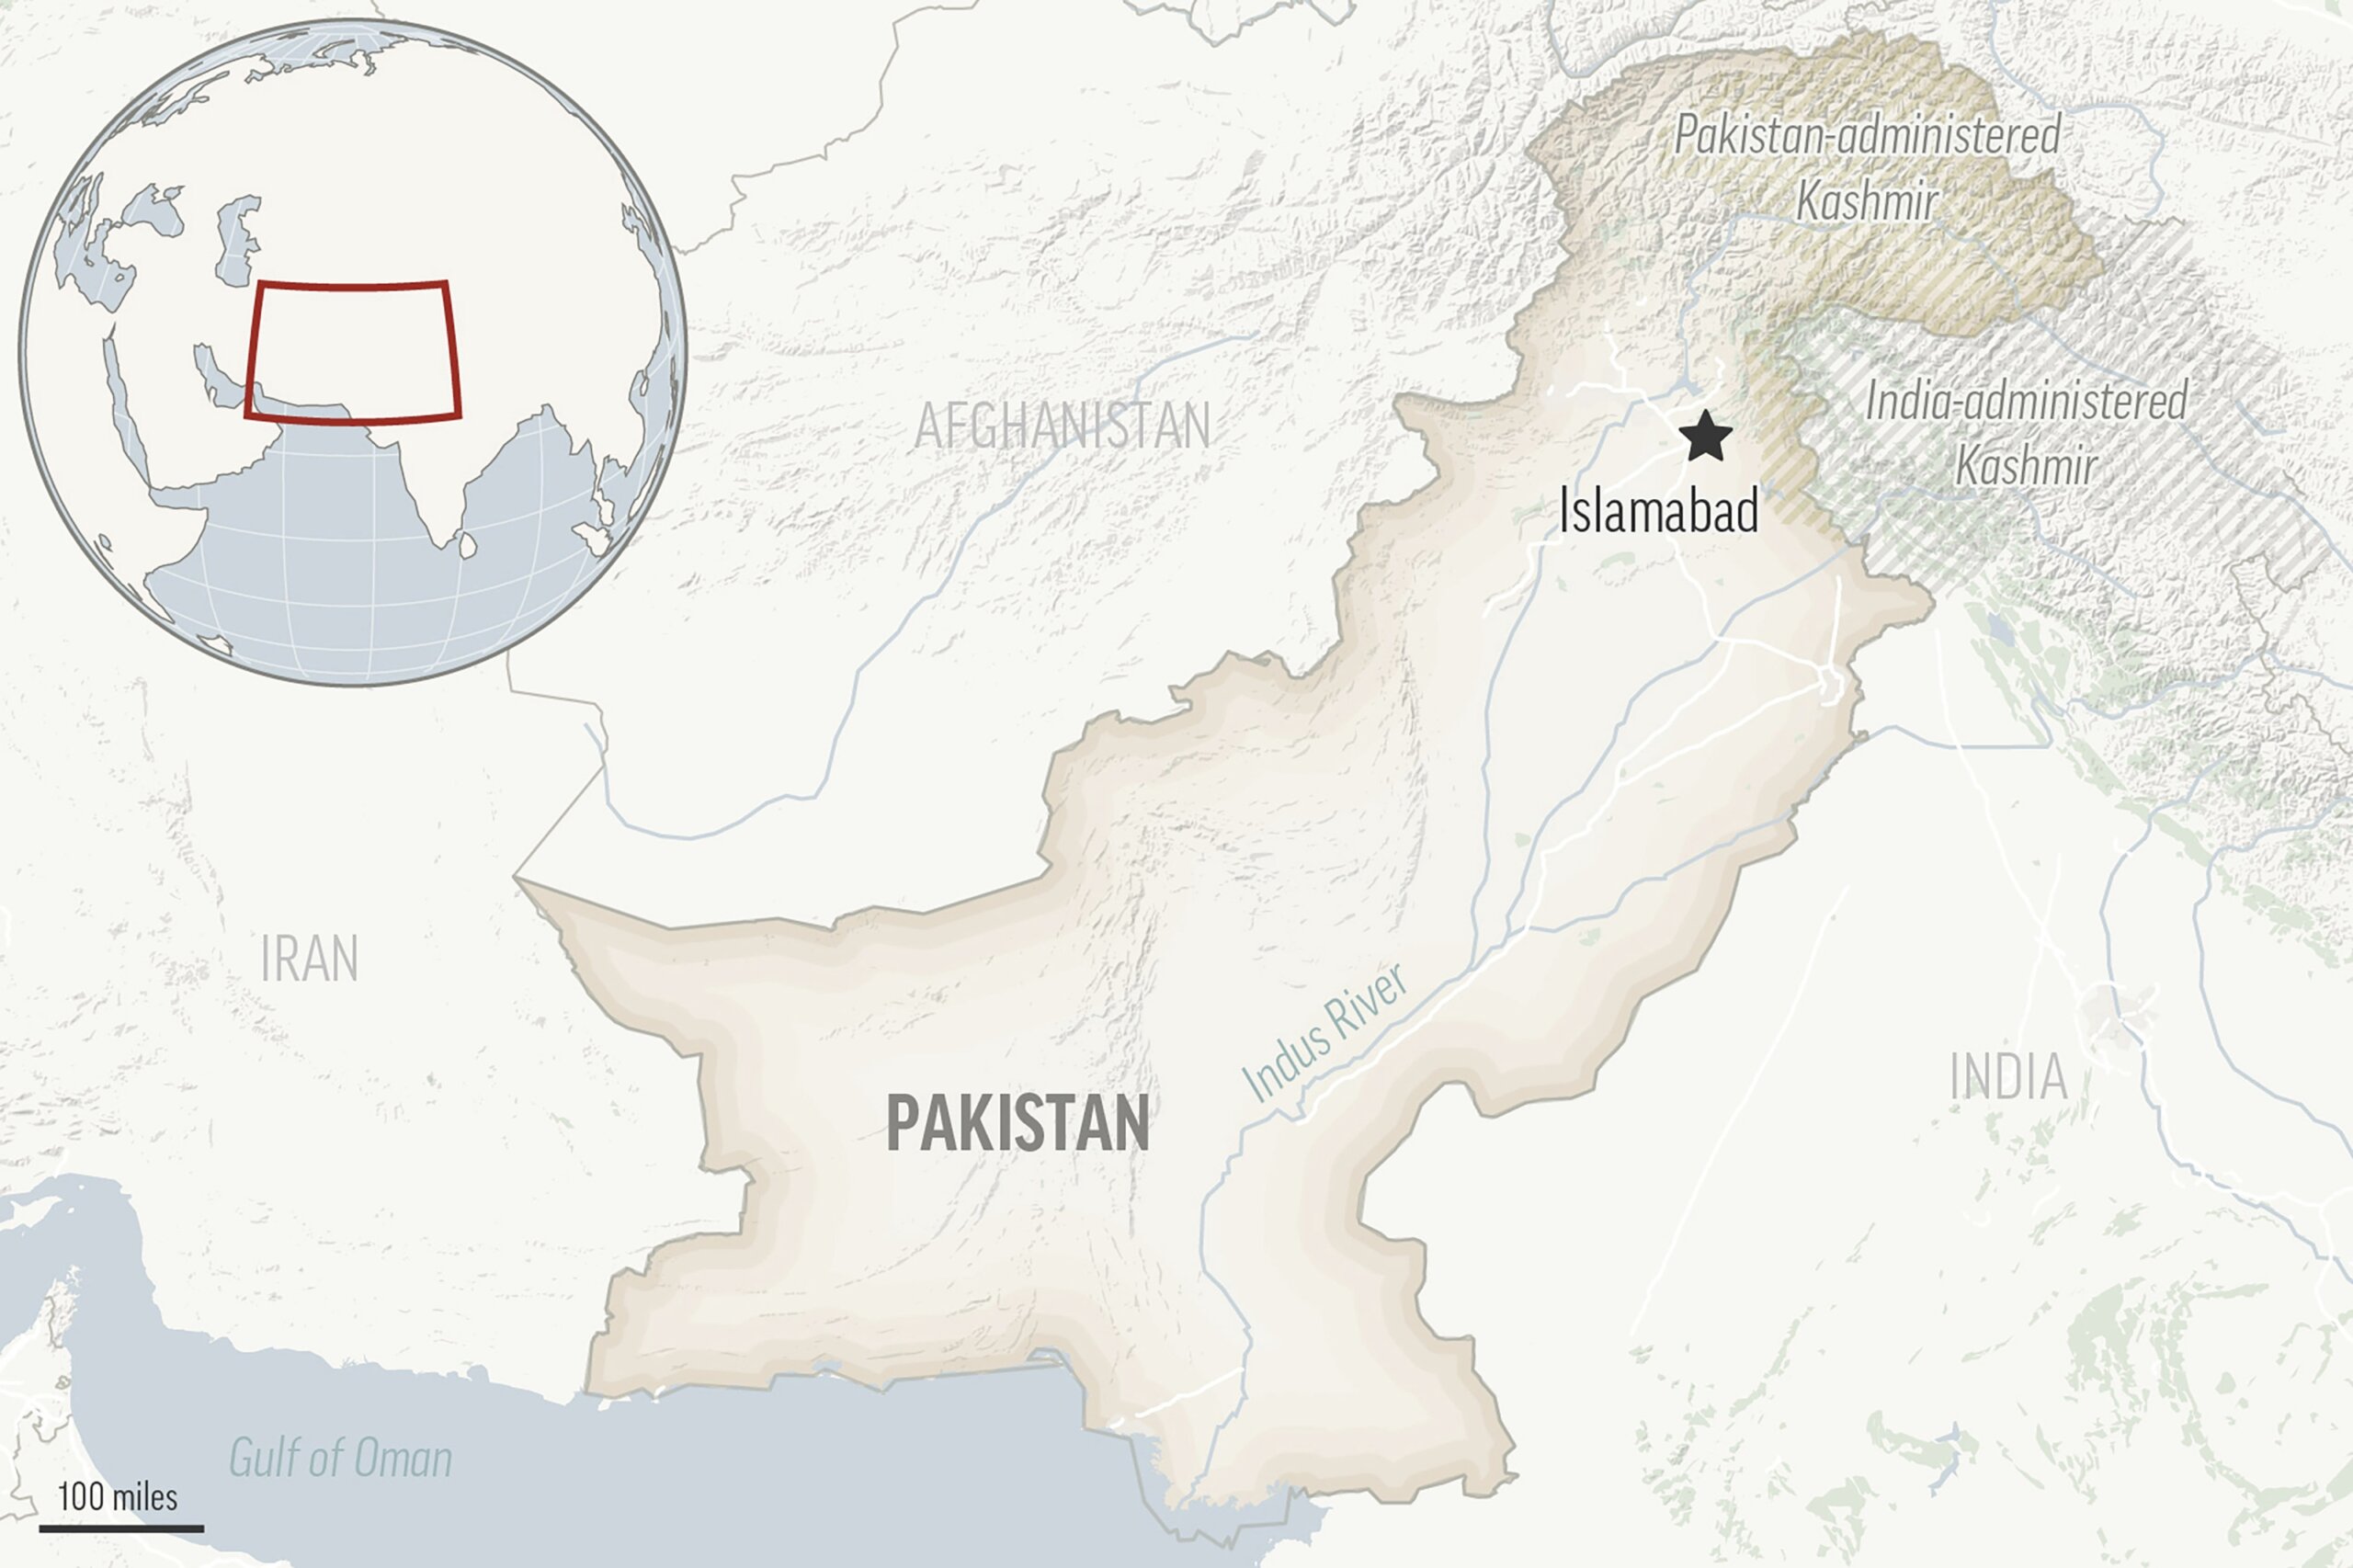 Pakistan army: Boating accident death toll rises to 51